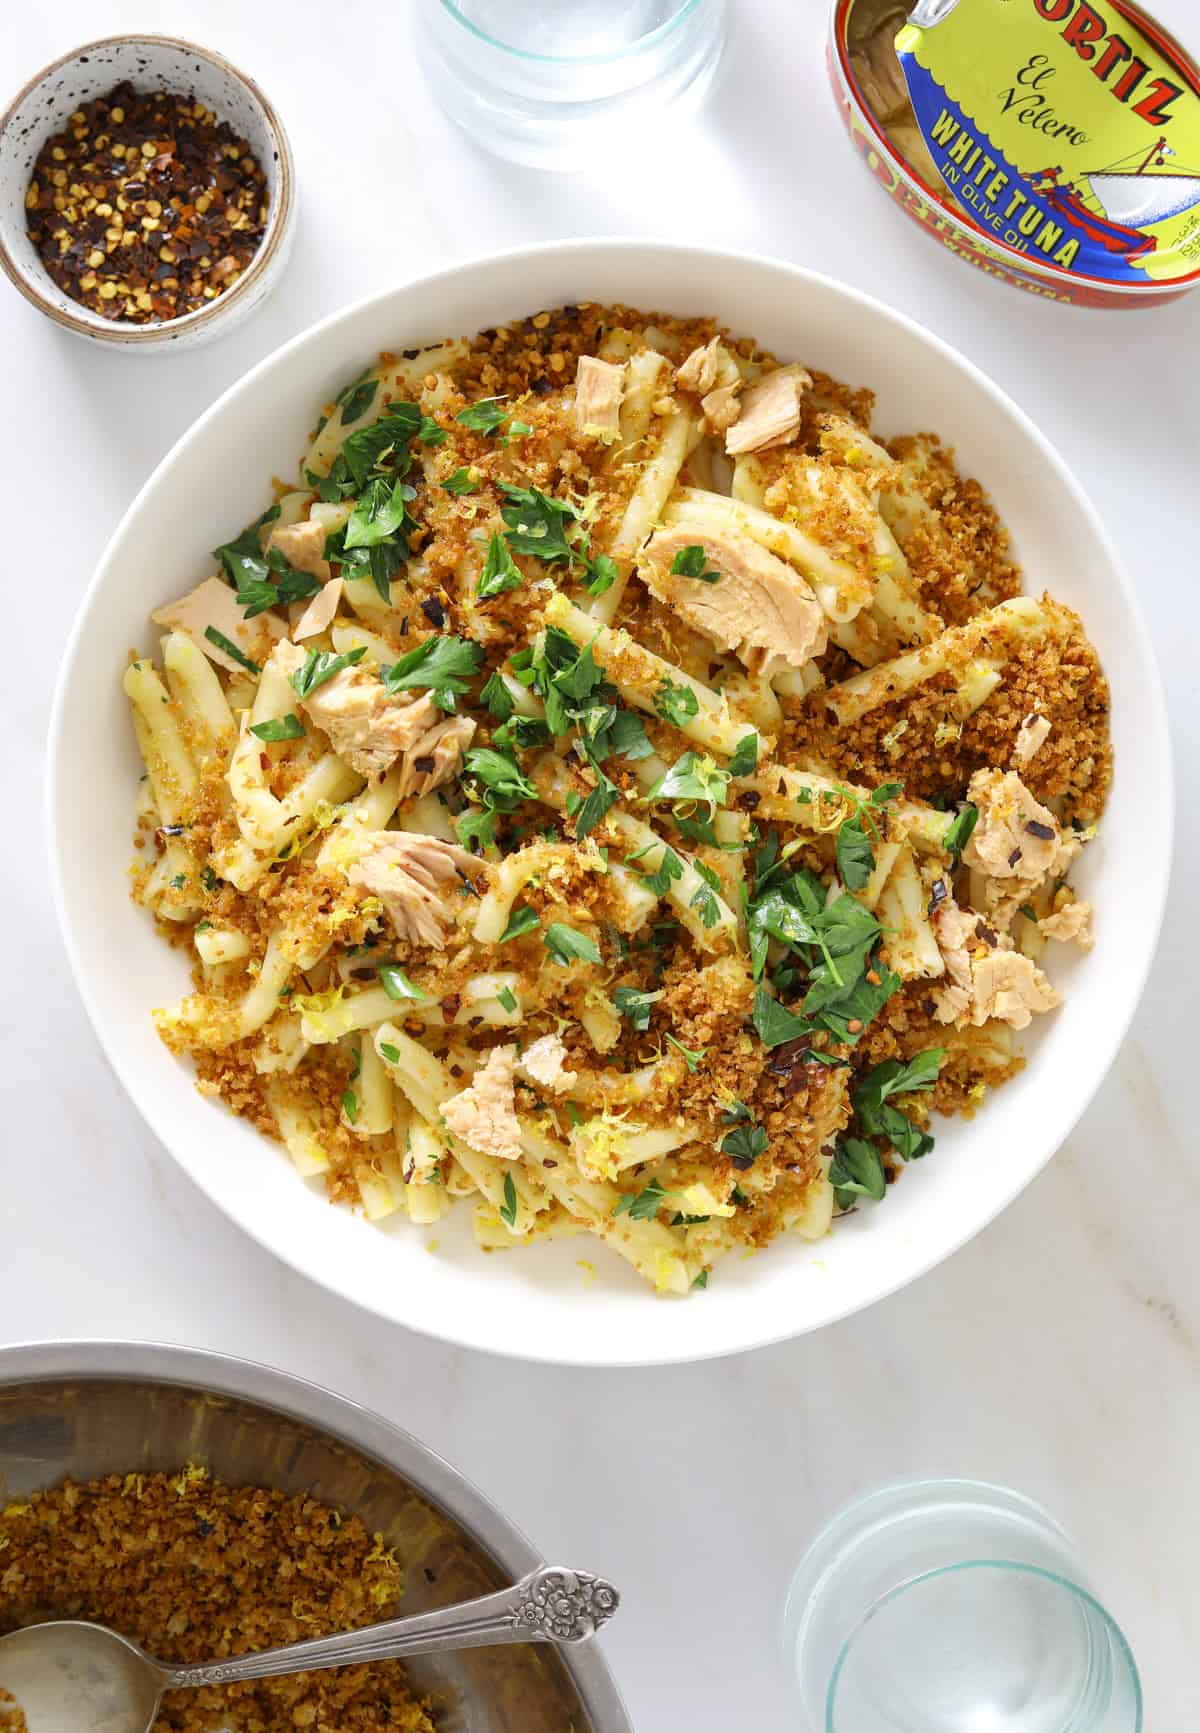 Casarecce Pantry Pasta with Oil-Packed Tuna and Spicy Garlic Breadcrumbs